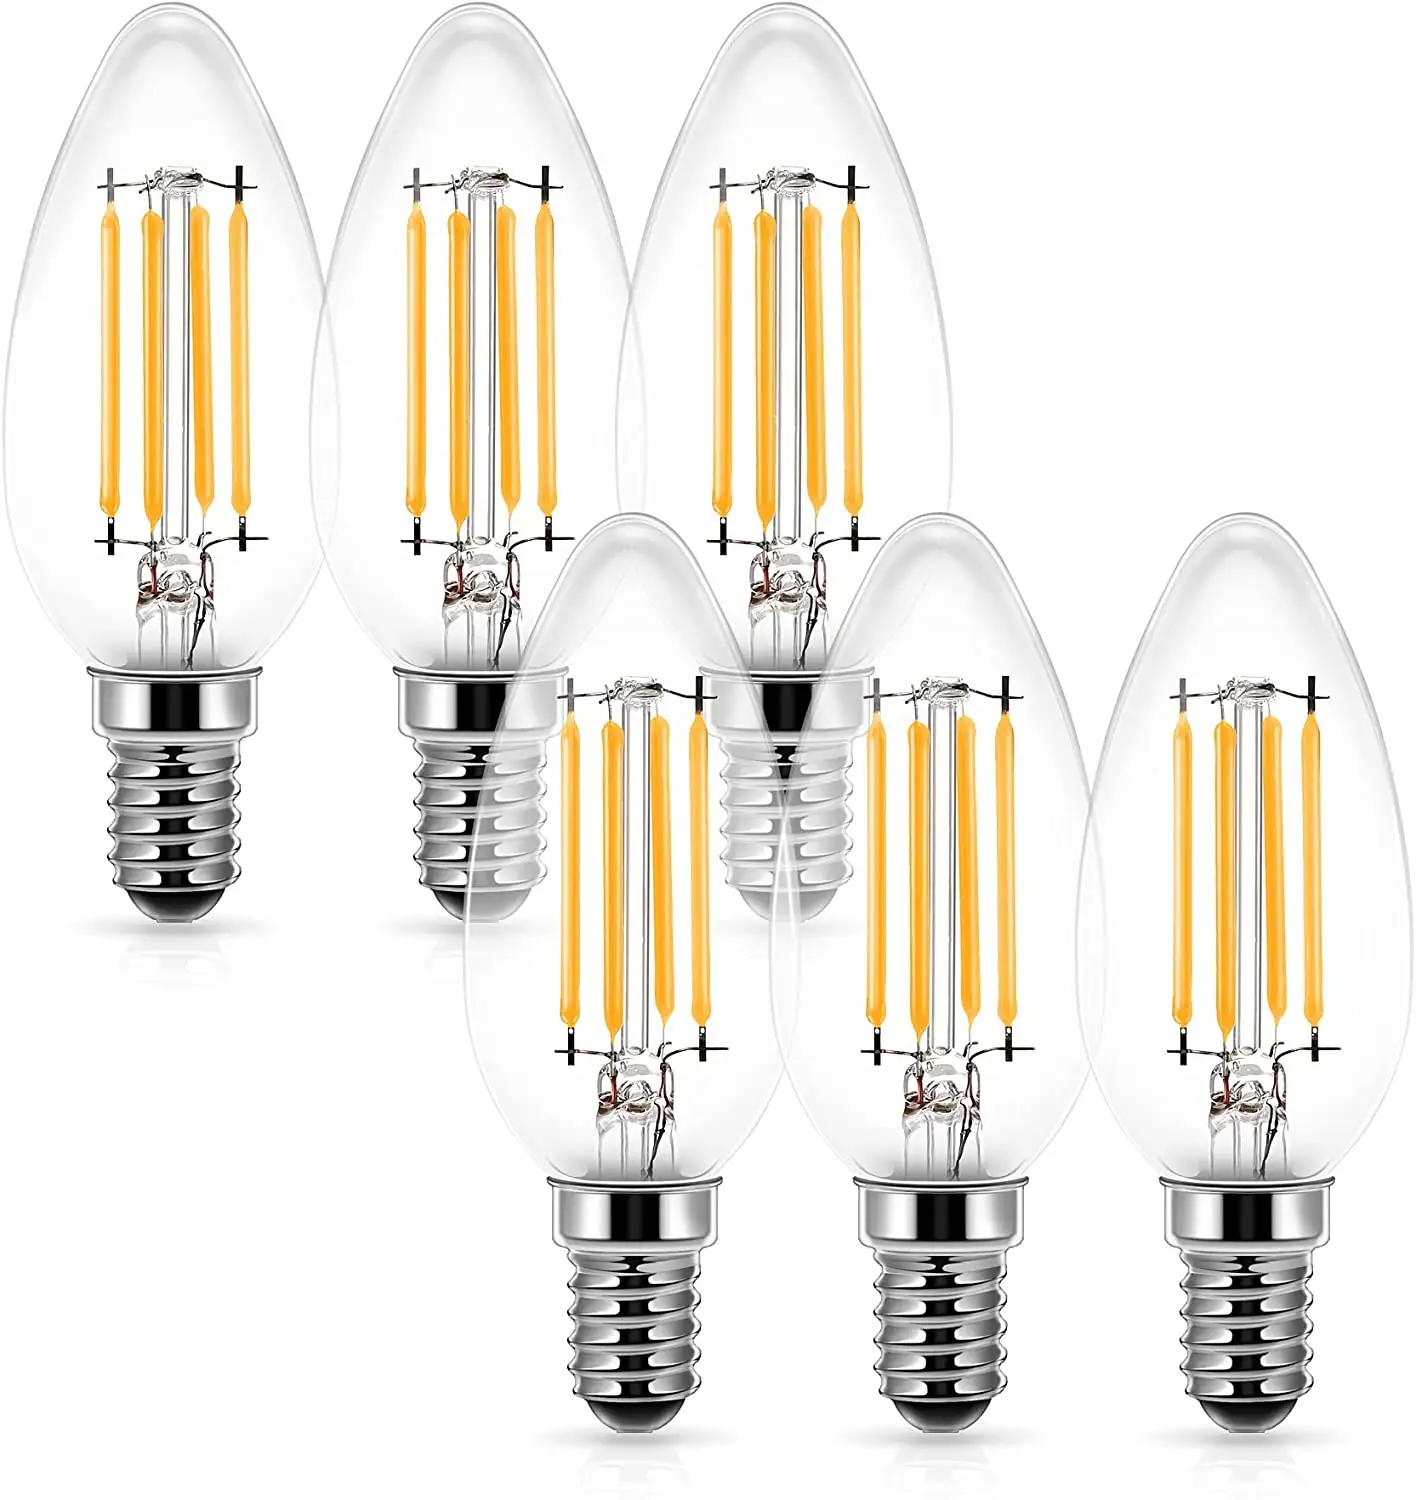 LOHAS E14 Dimmable Candle Bulbs 4W 40W Equivalent 400 Lumens Small Screw 2700K Soft White SES LED Bulb Perfect for Chandelier